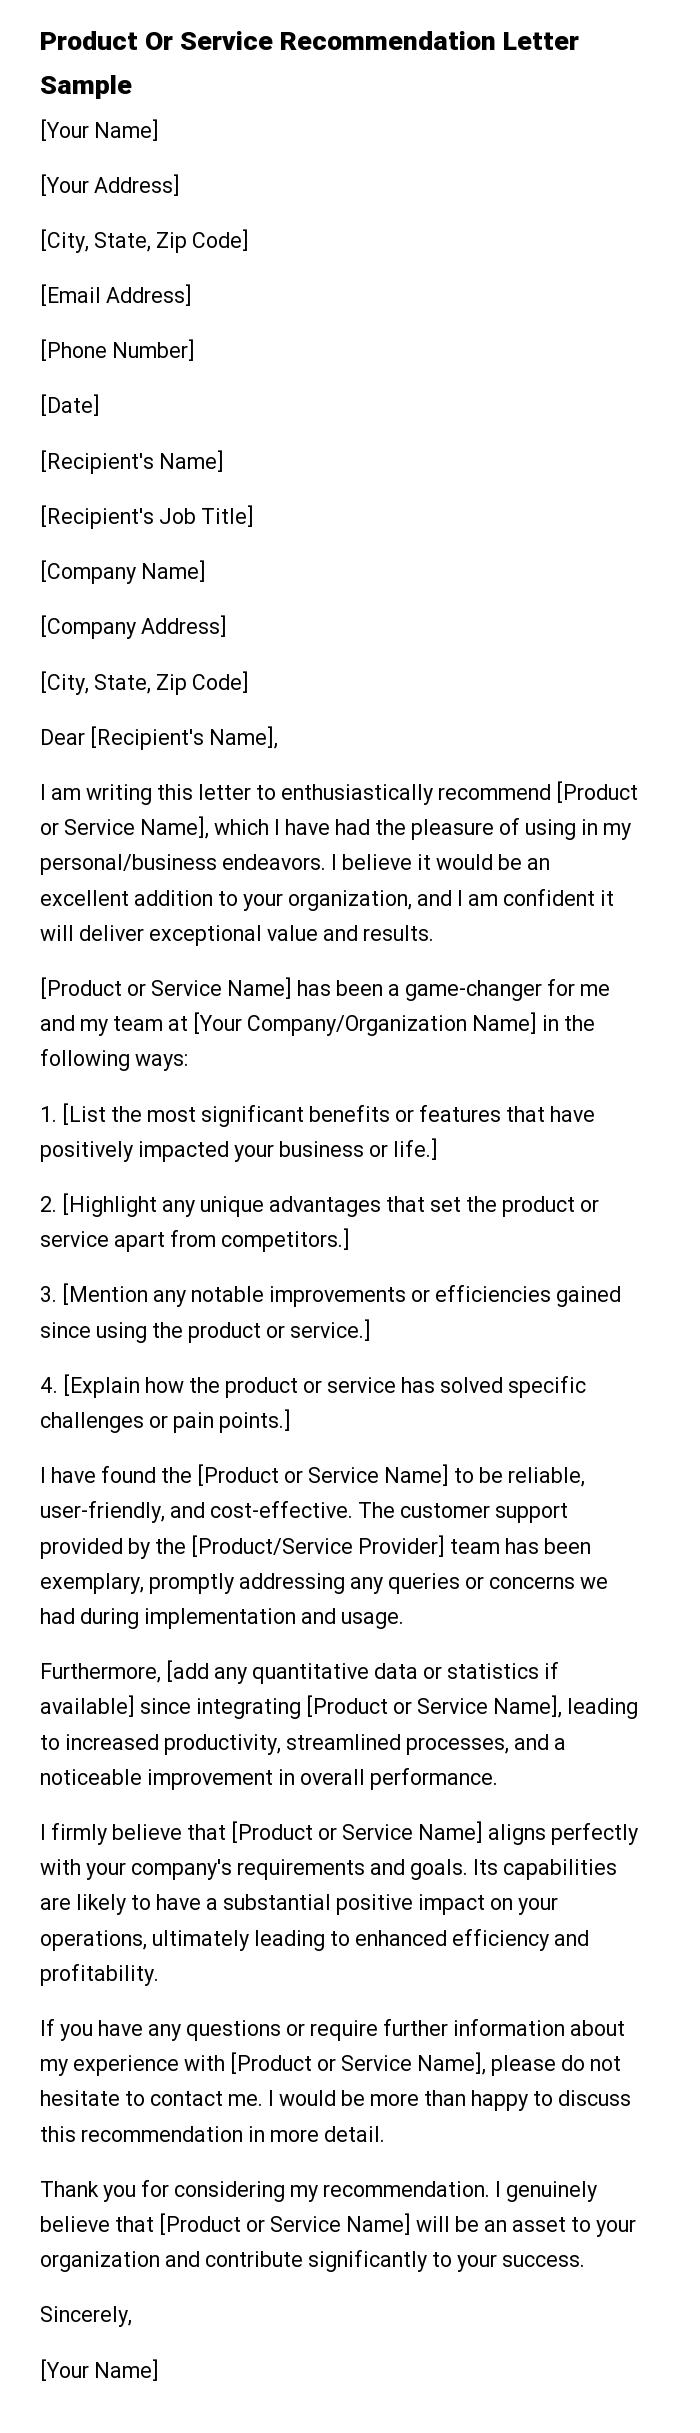 Product Or Service Recommendation Letter Sample